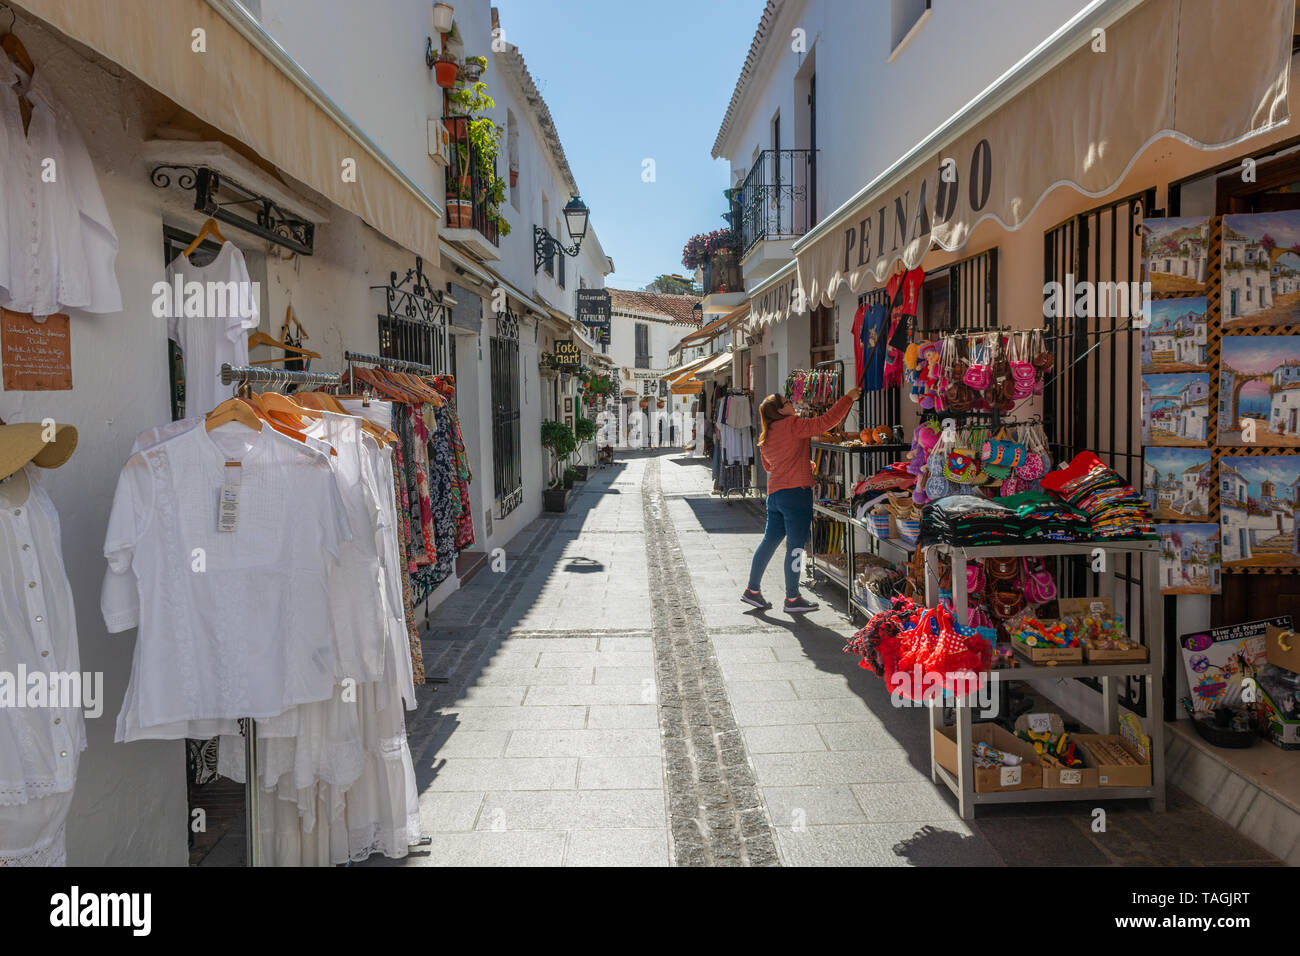 Shopkeeper hanging up clothes outside a shop in a narrow street in Mijas, Andalusia region, Spain Stock Photo